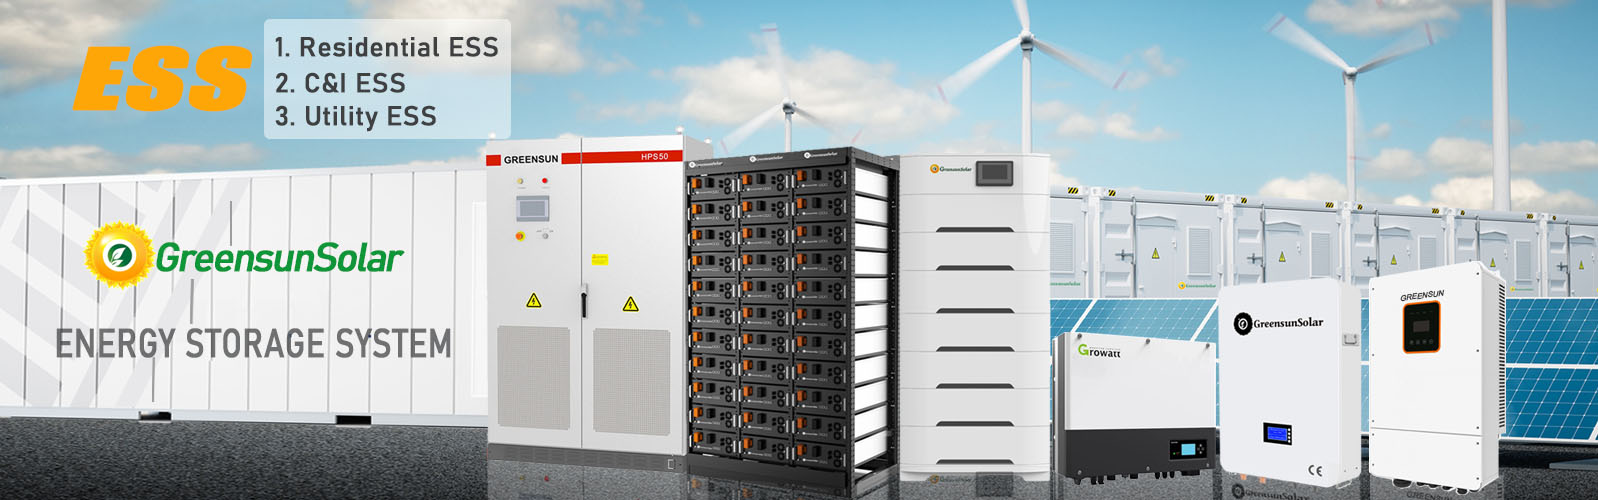 BESS Energy Storage System Solutions